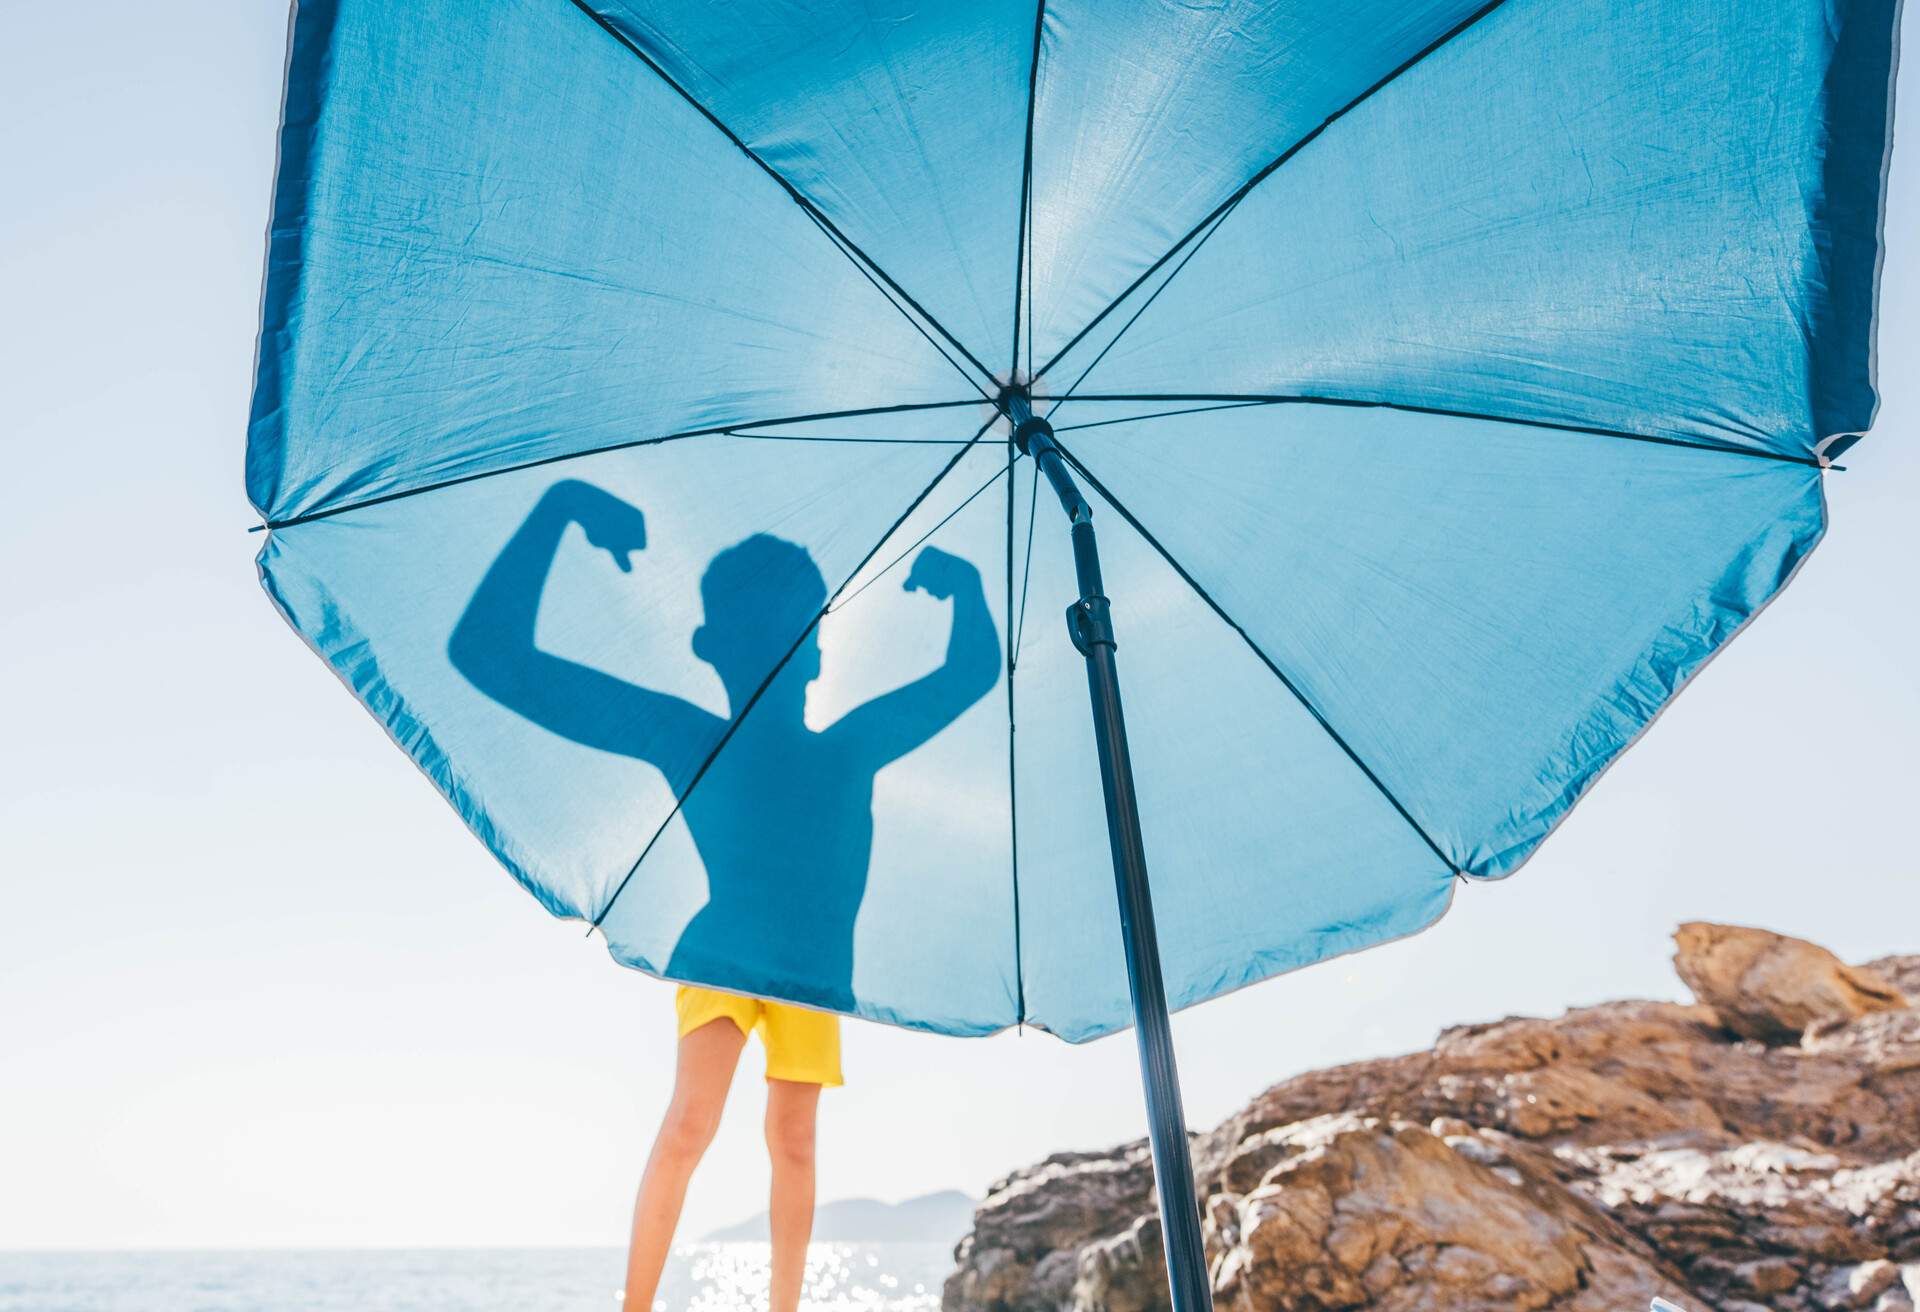 Silhouettes of boy flexing his muscles on blue beach umbrella.